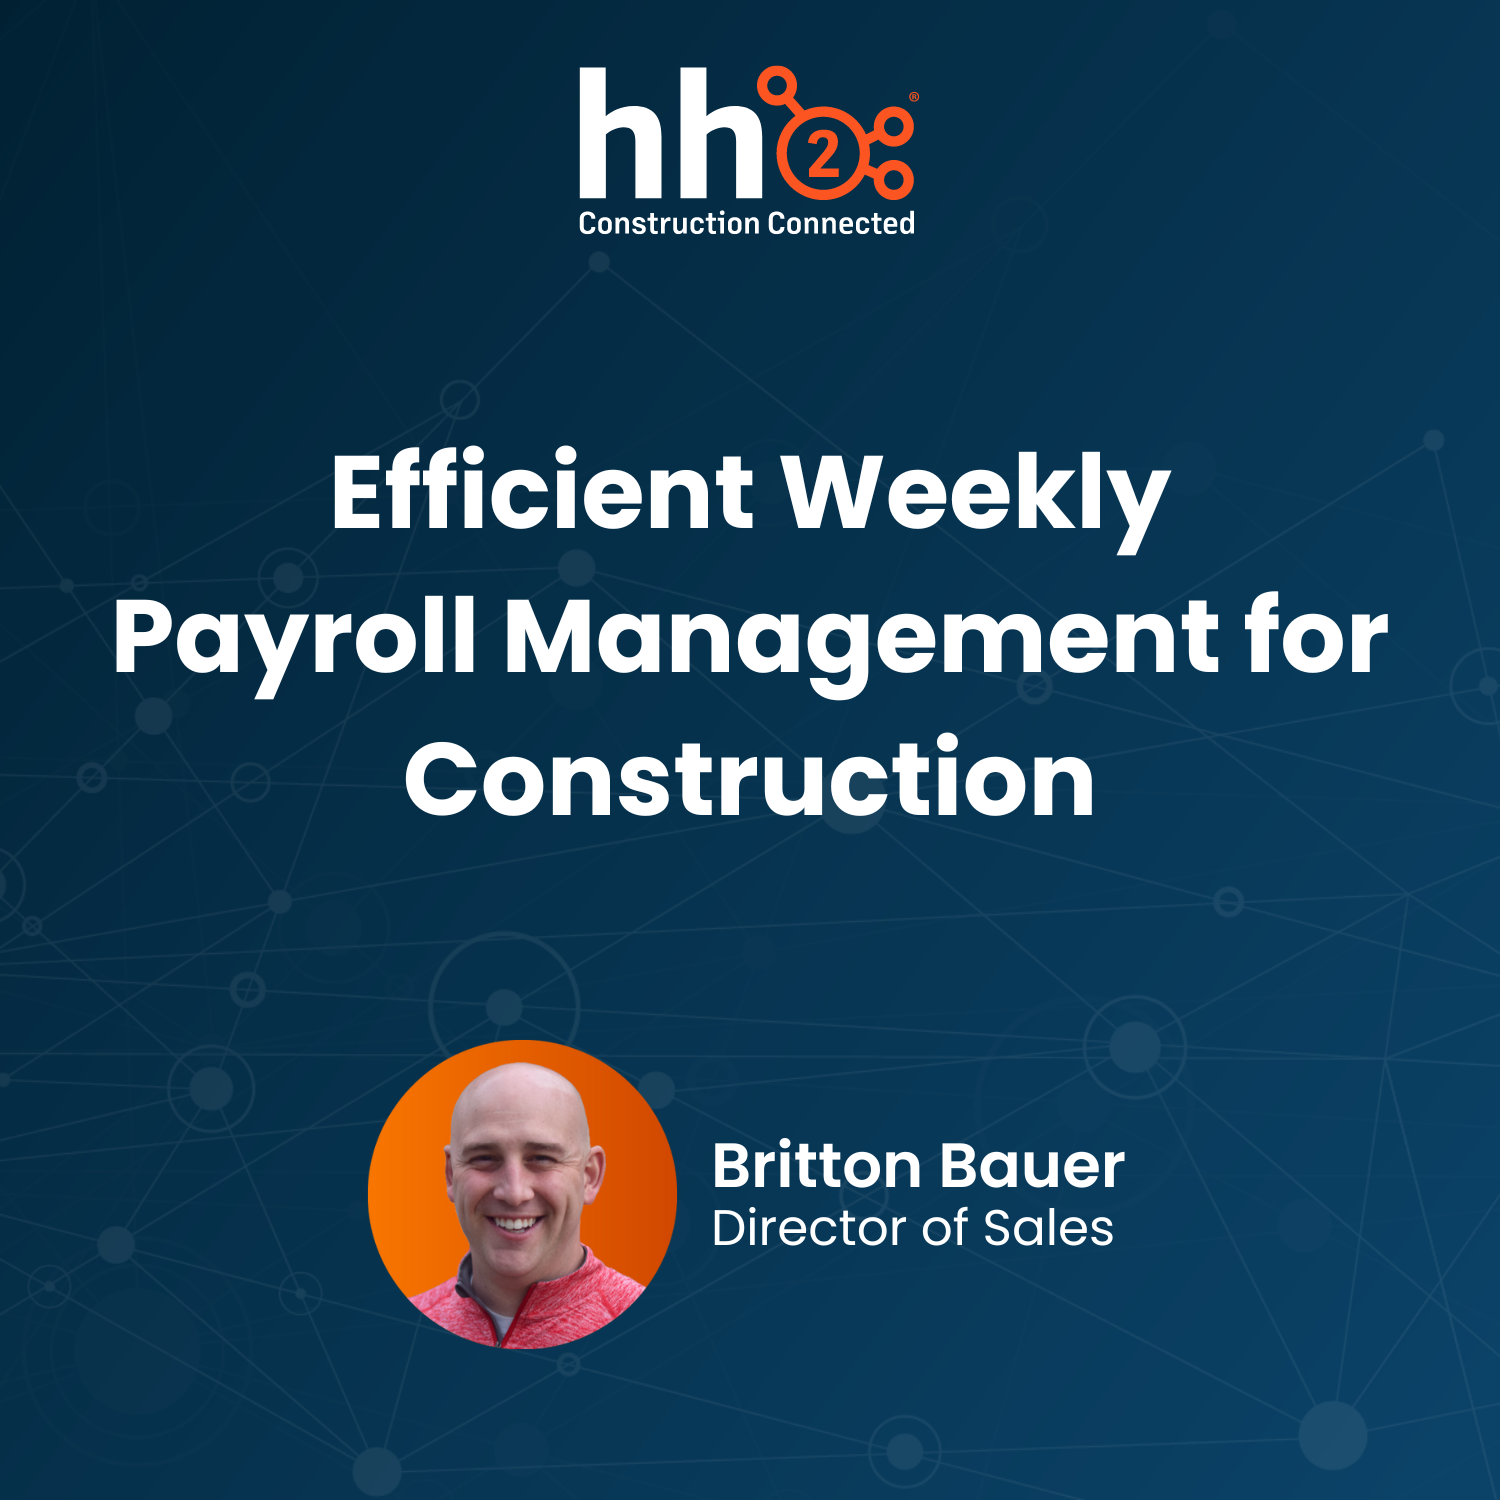 Efficient Weekly Payroll Management for Construction